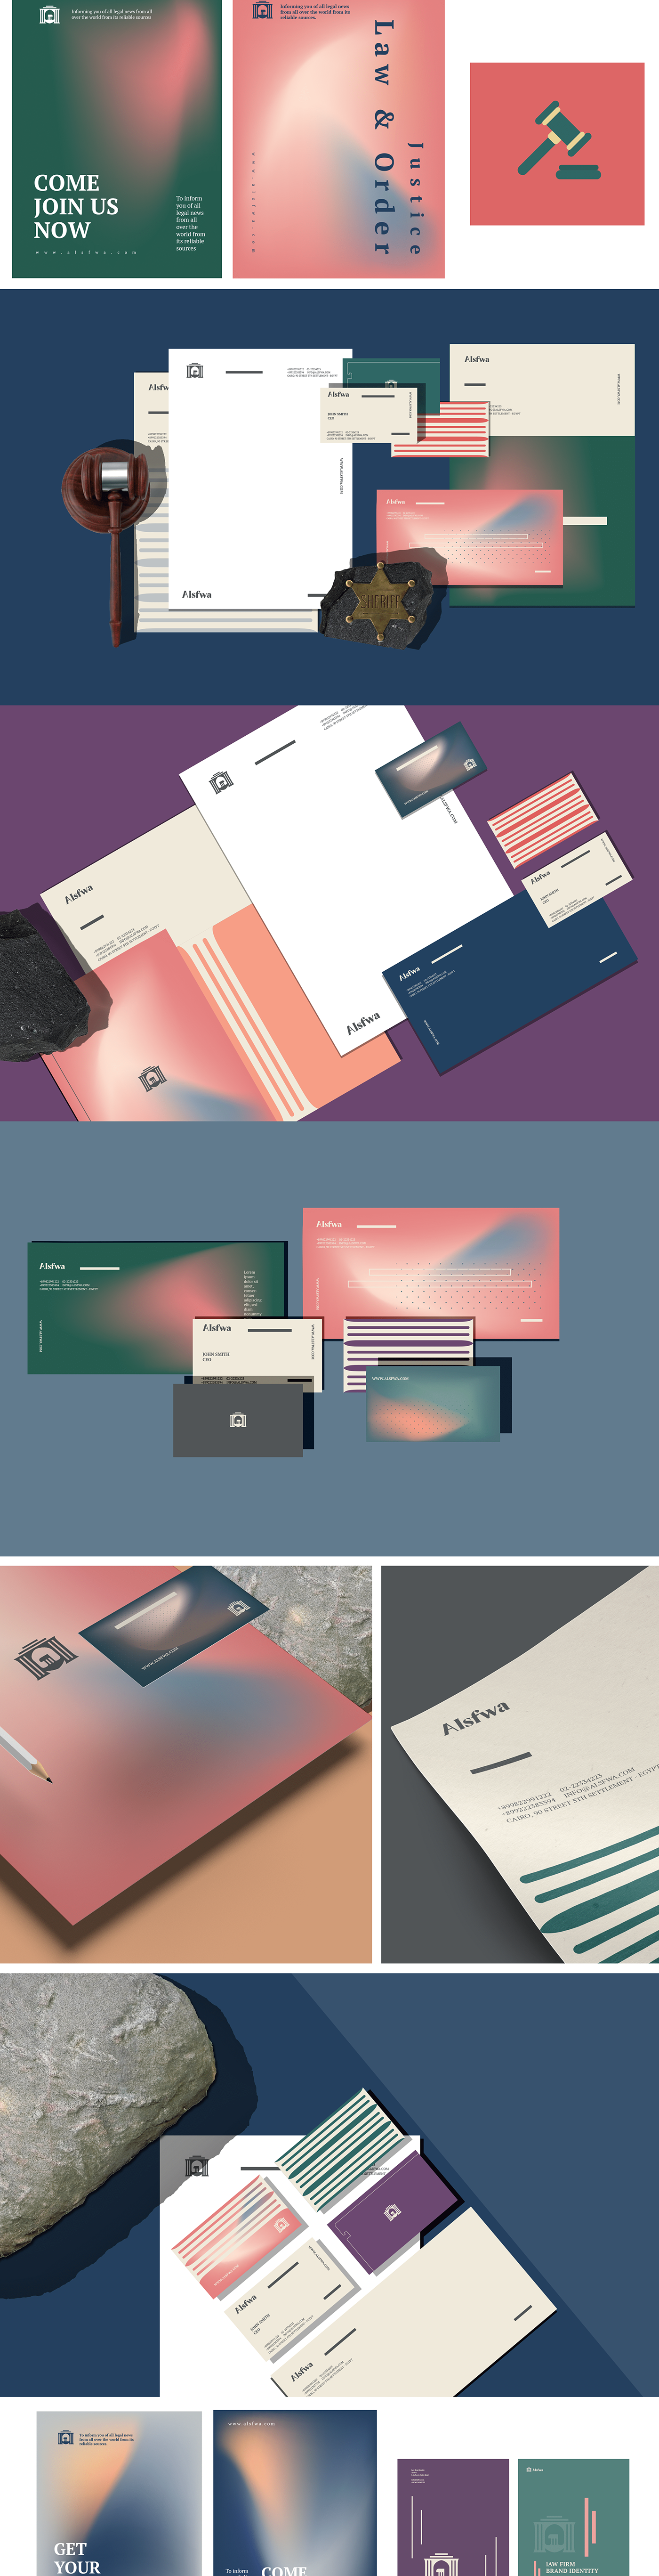 Consulting platform legal services visual identity branding  law